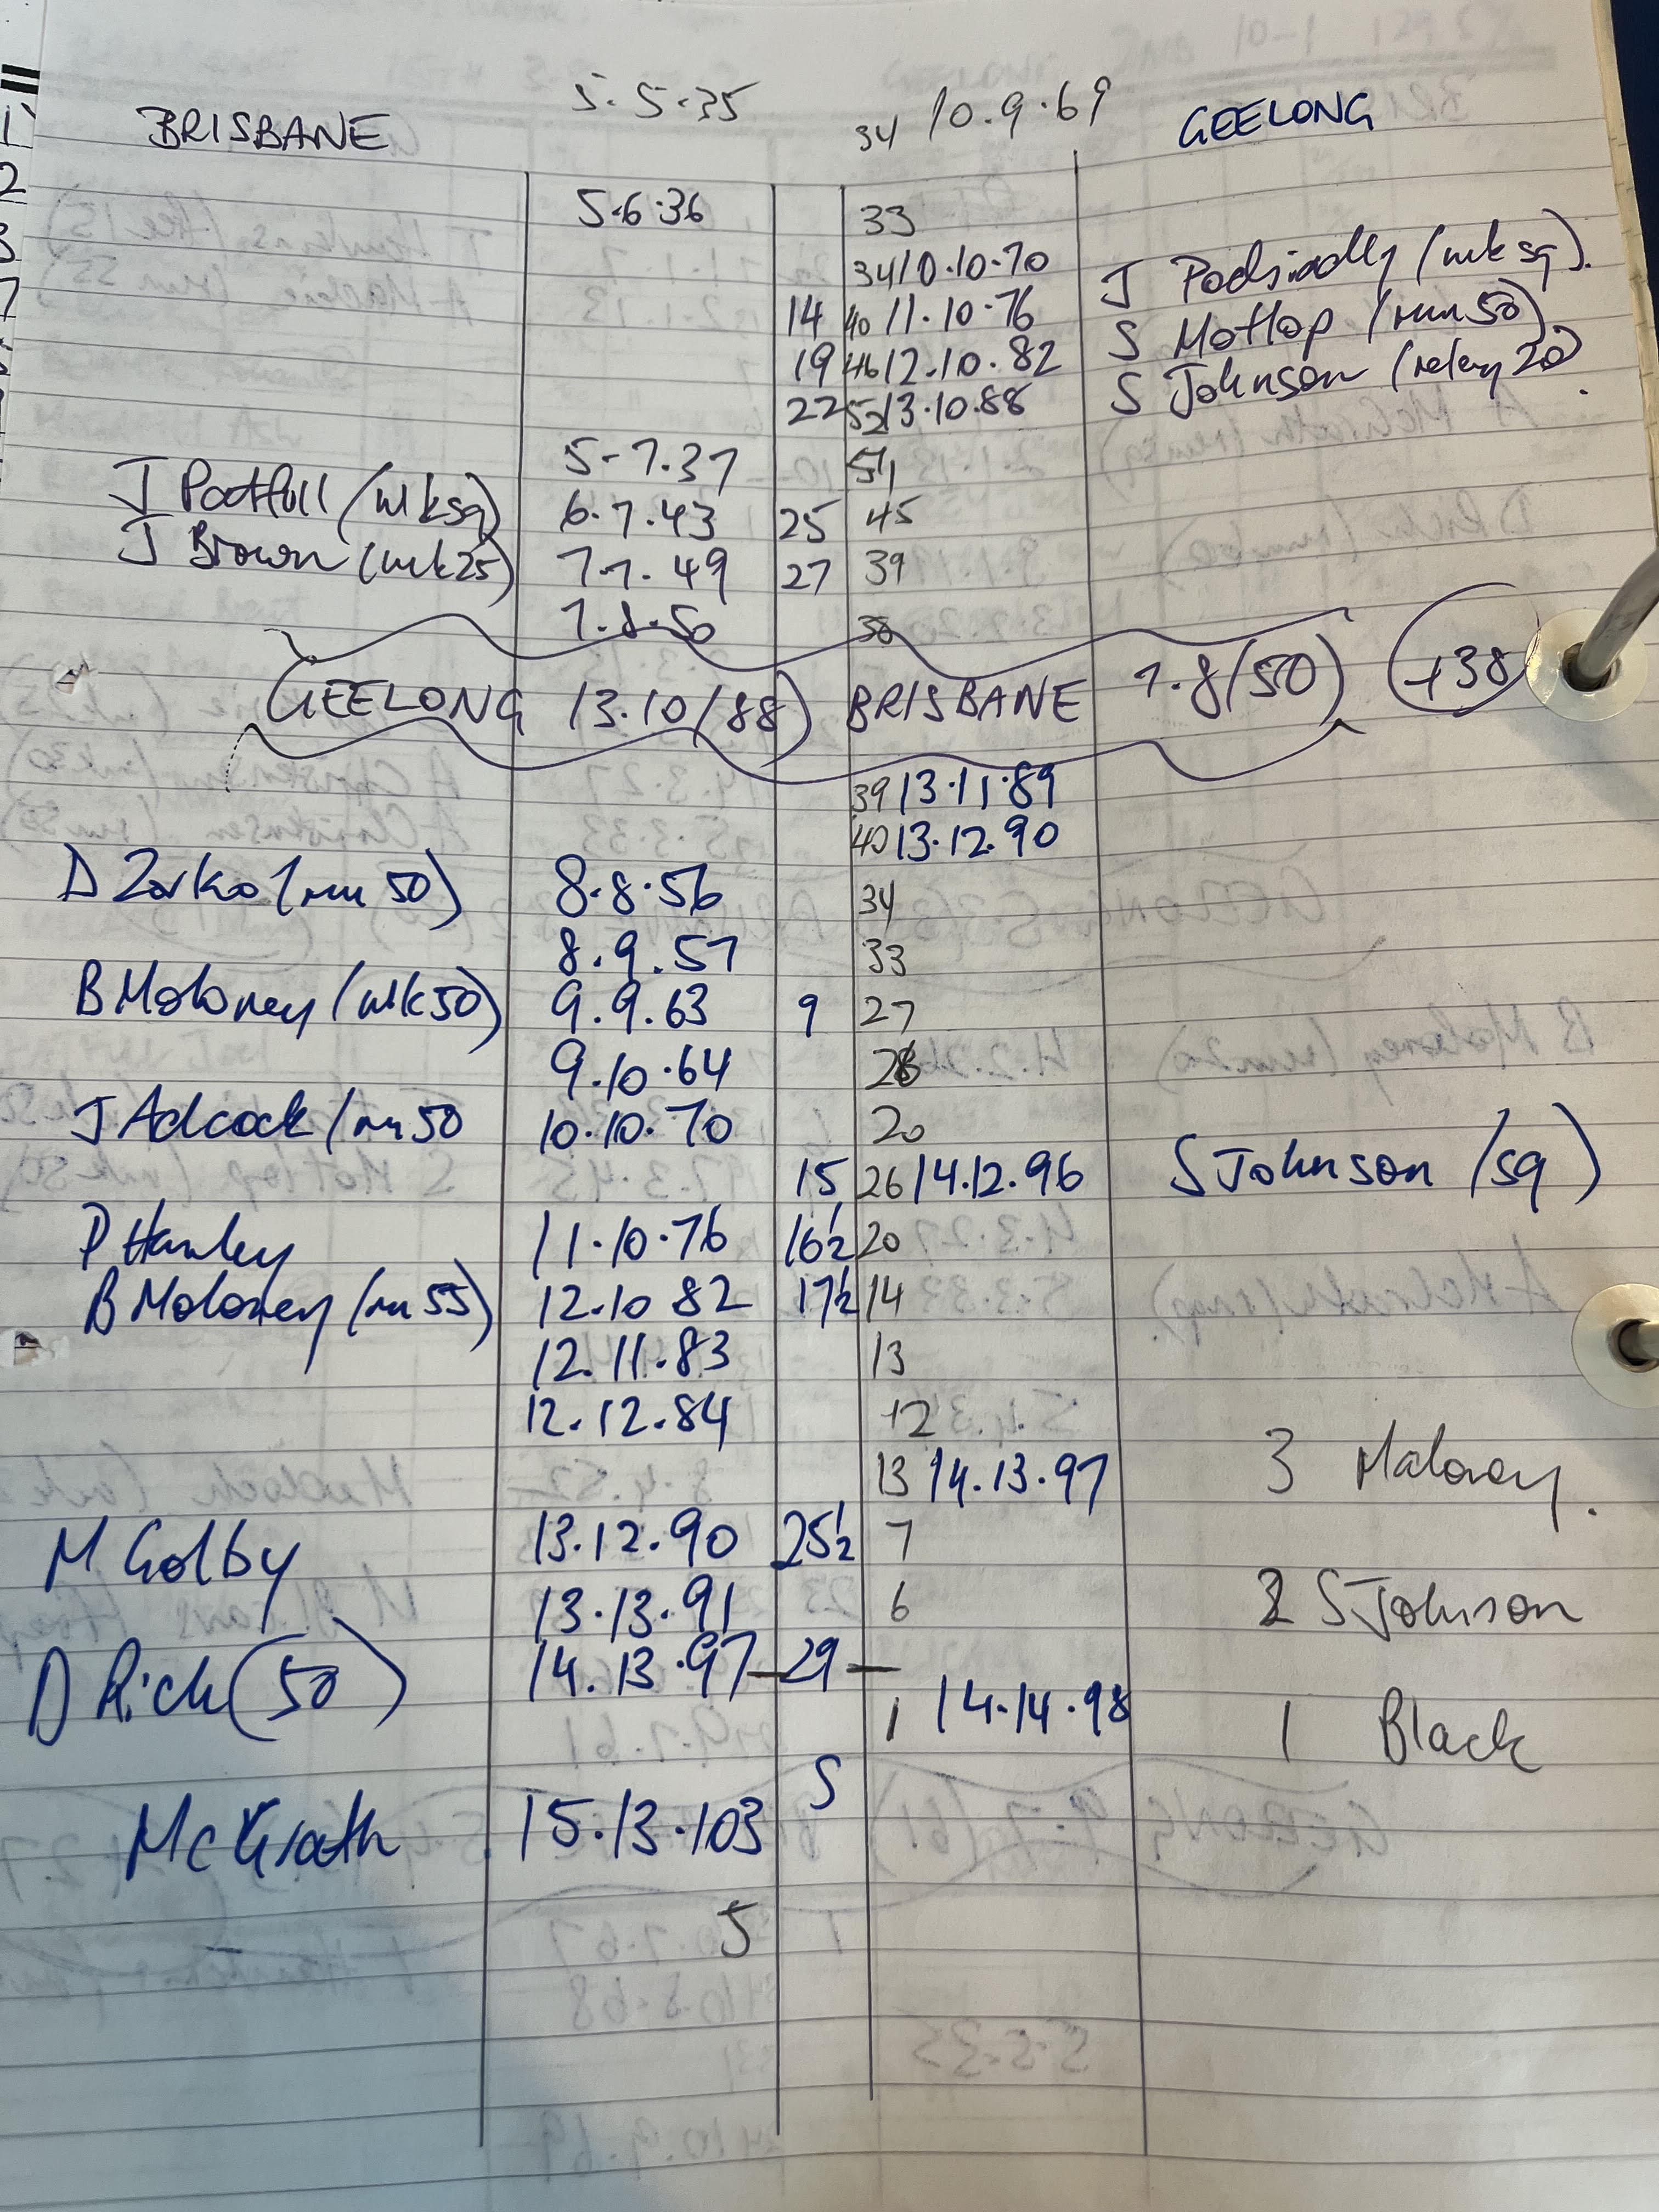 Hand-written notes on a sheet in columns with scorers, times, and updated scores for an AFL game.